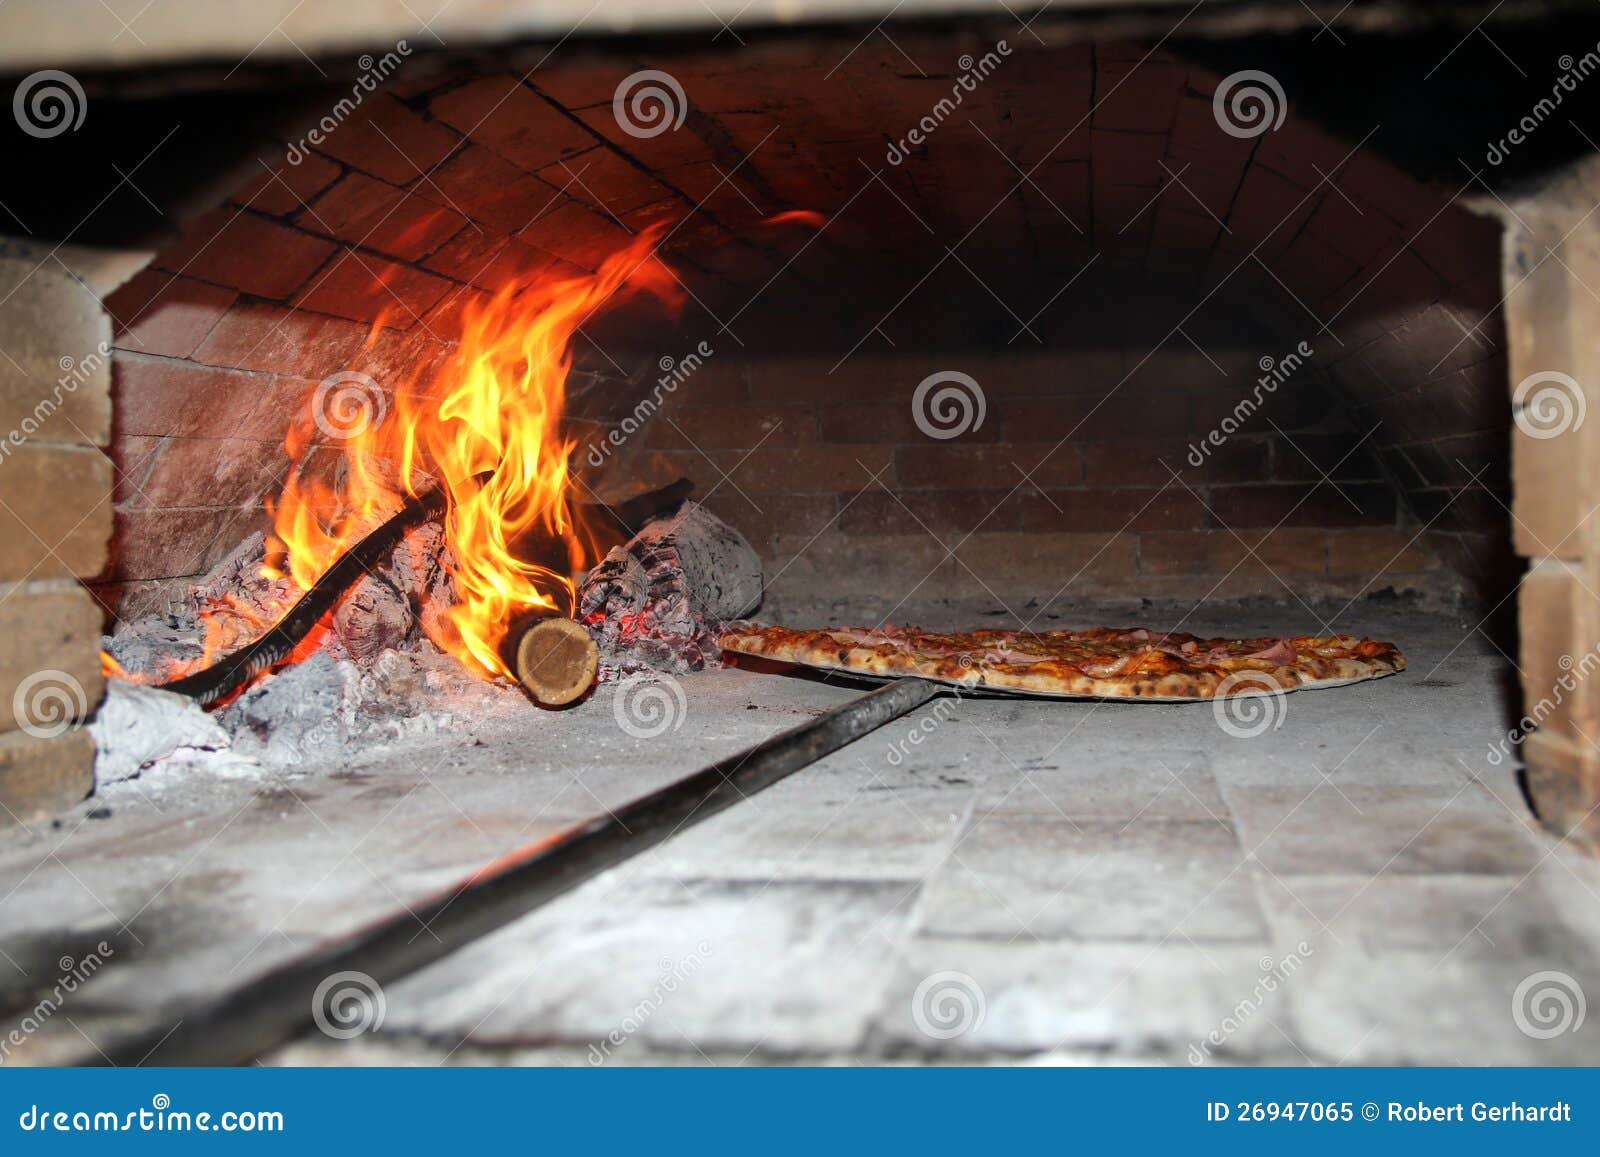 Pizza Baking In Wood Fired Oven Royalty Free Stock Photo - Image ...